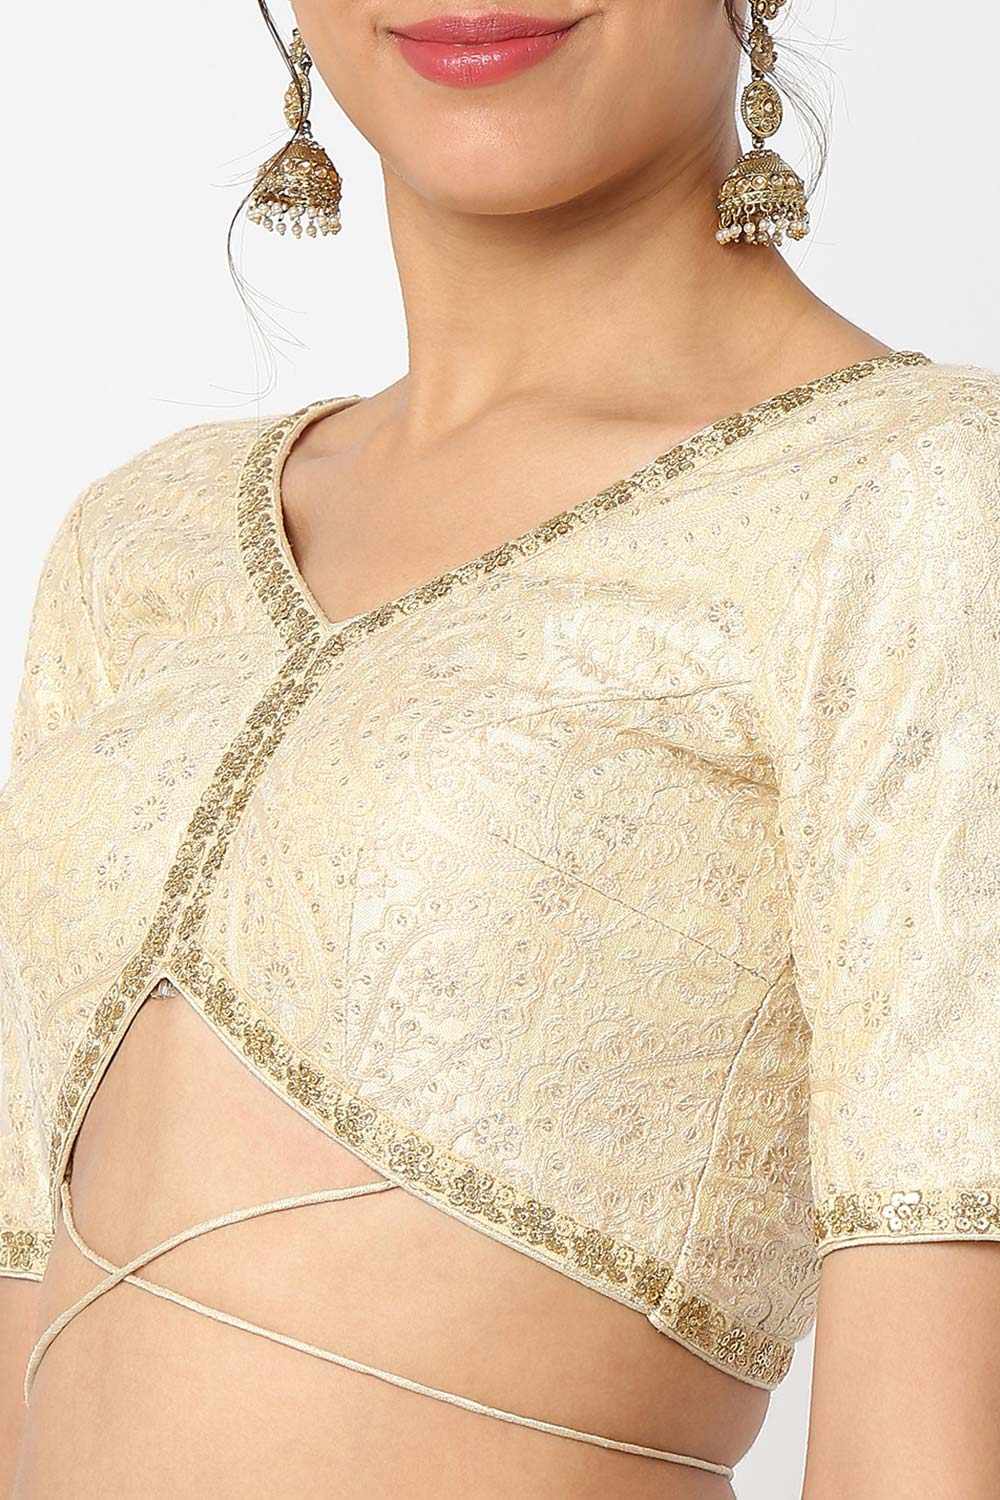 Cream Silk Embroidered Elbow Sleeves Blouse